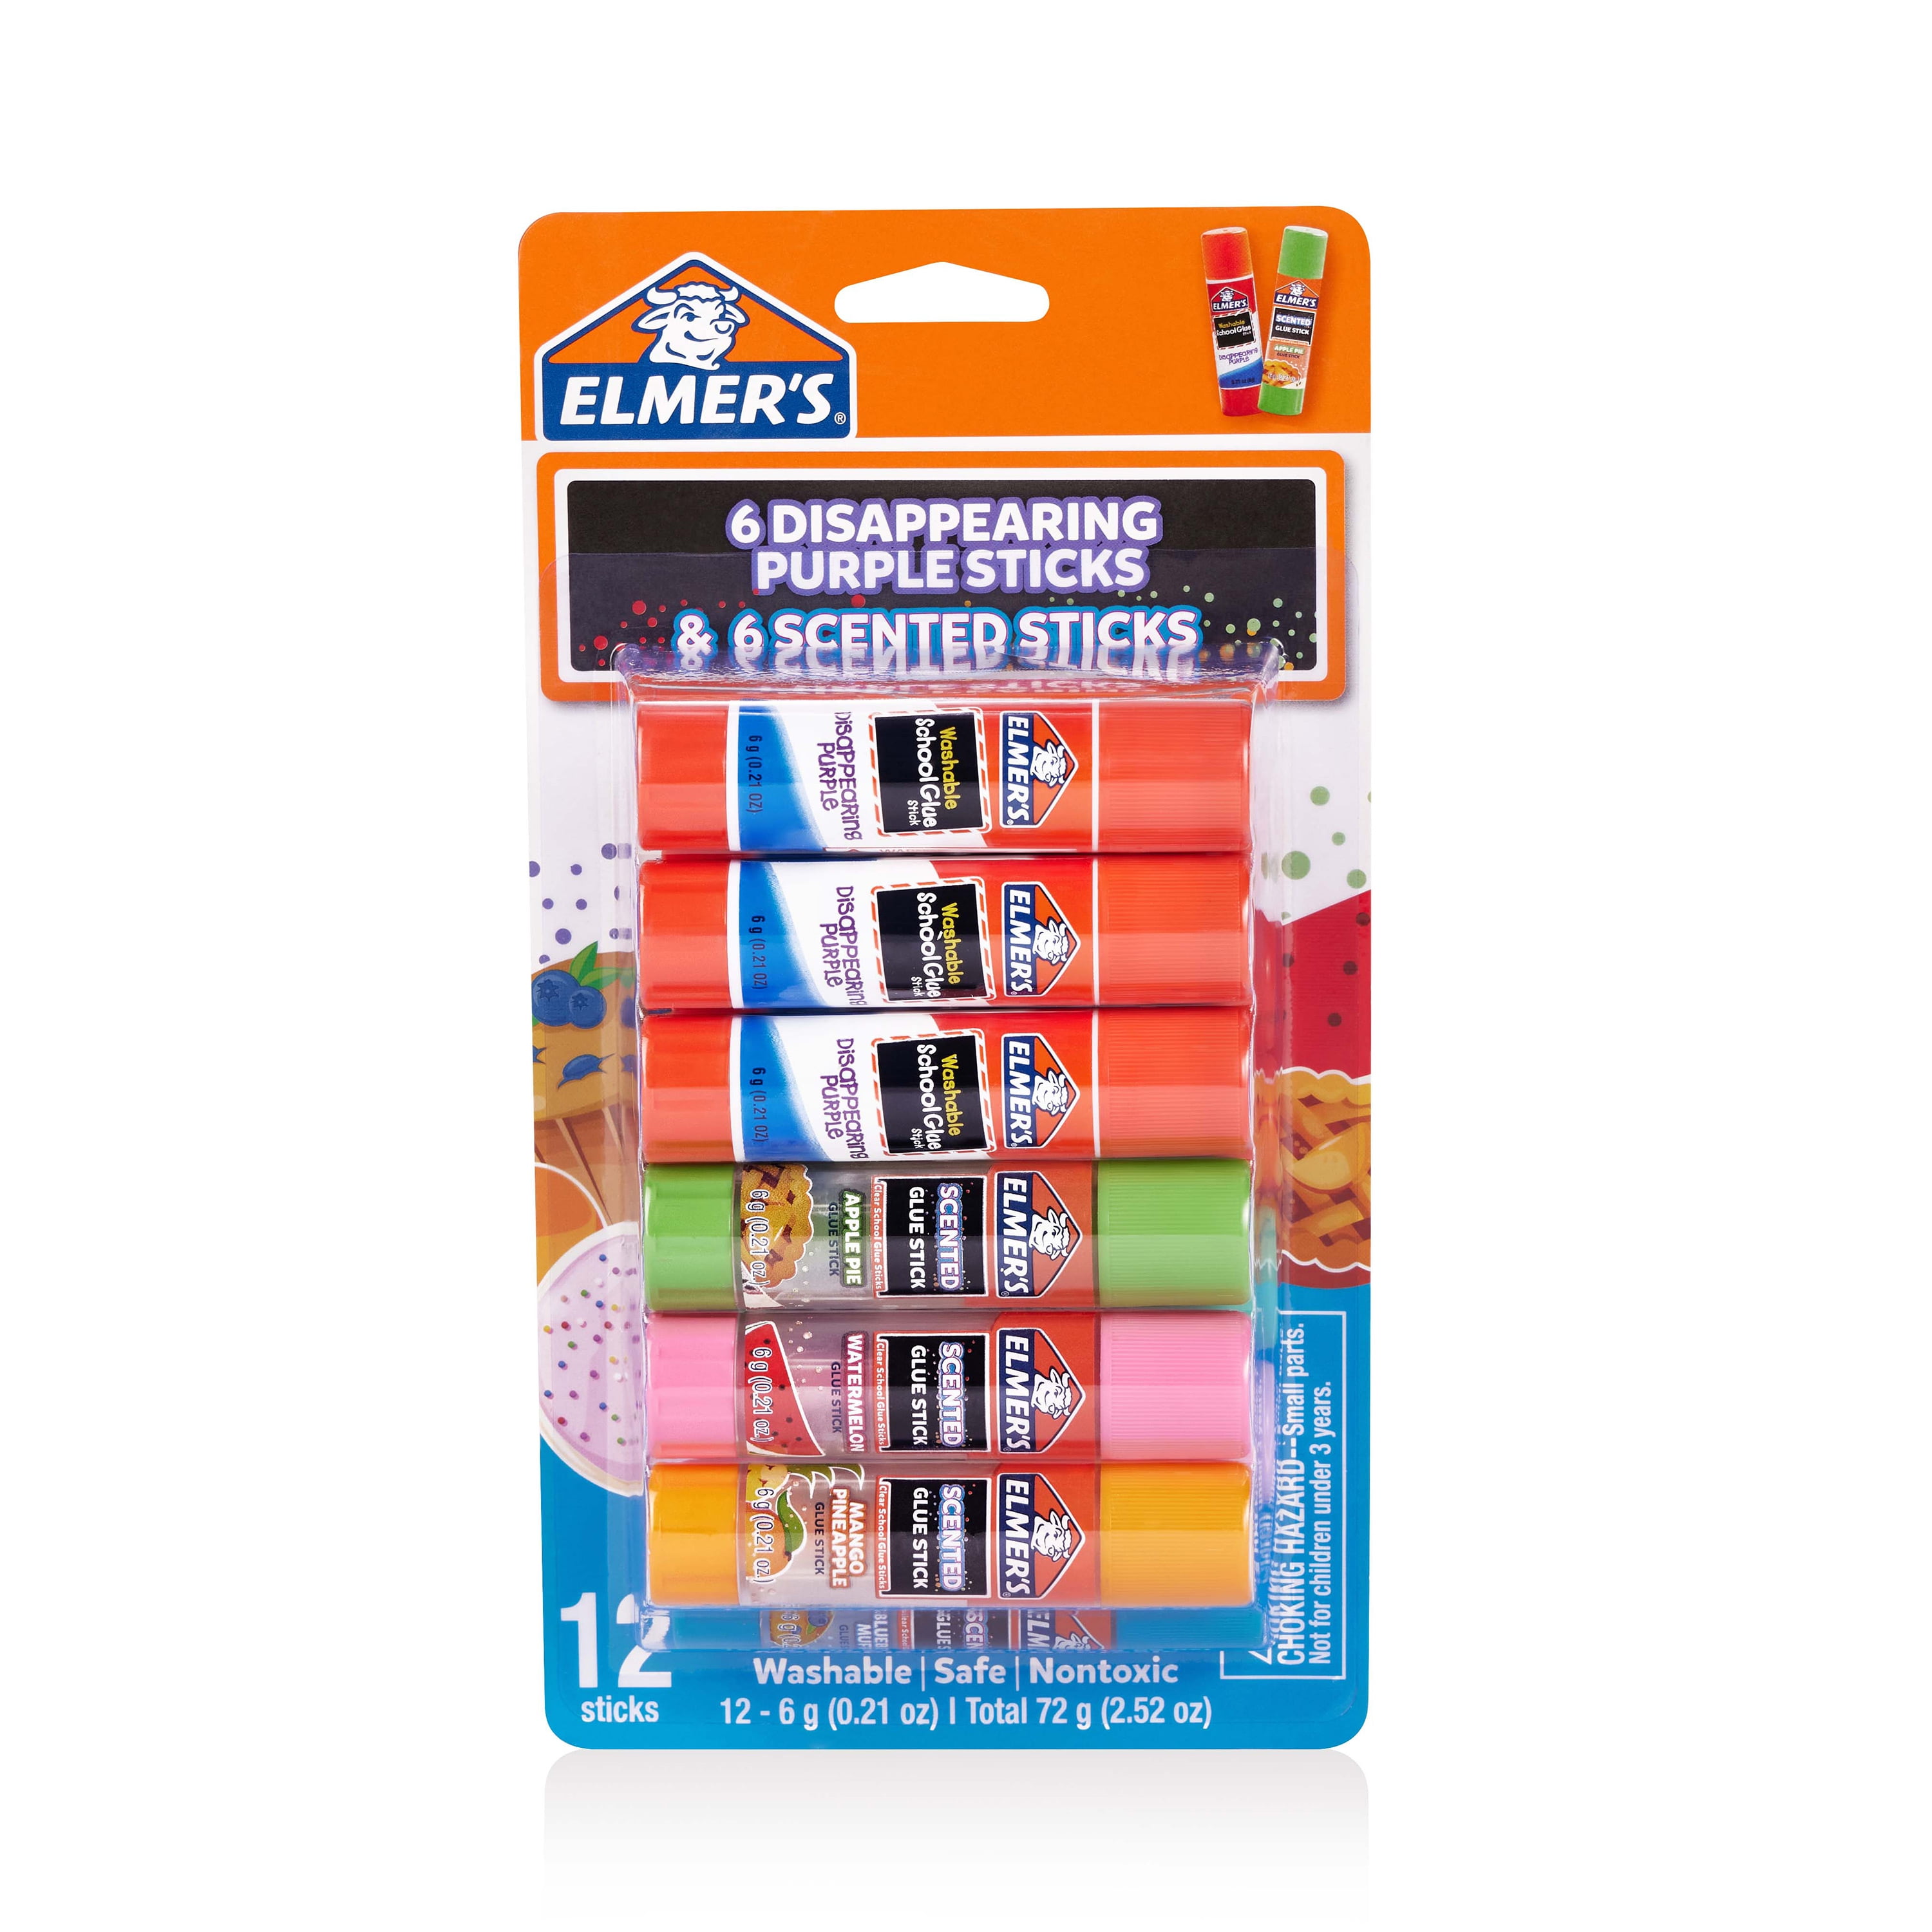 Elmers Scented Glue Sticks and Disappearing Purple Variety Pack, 12 Count